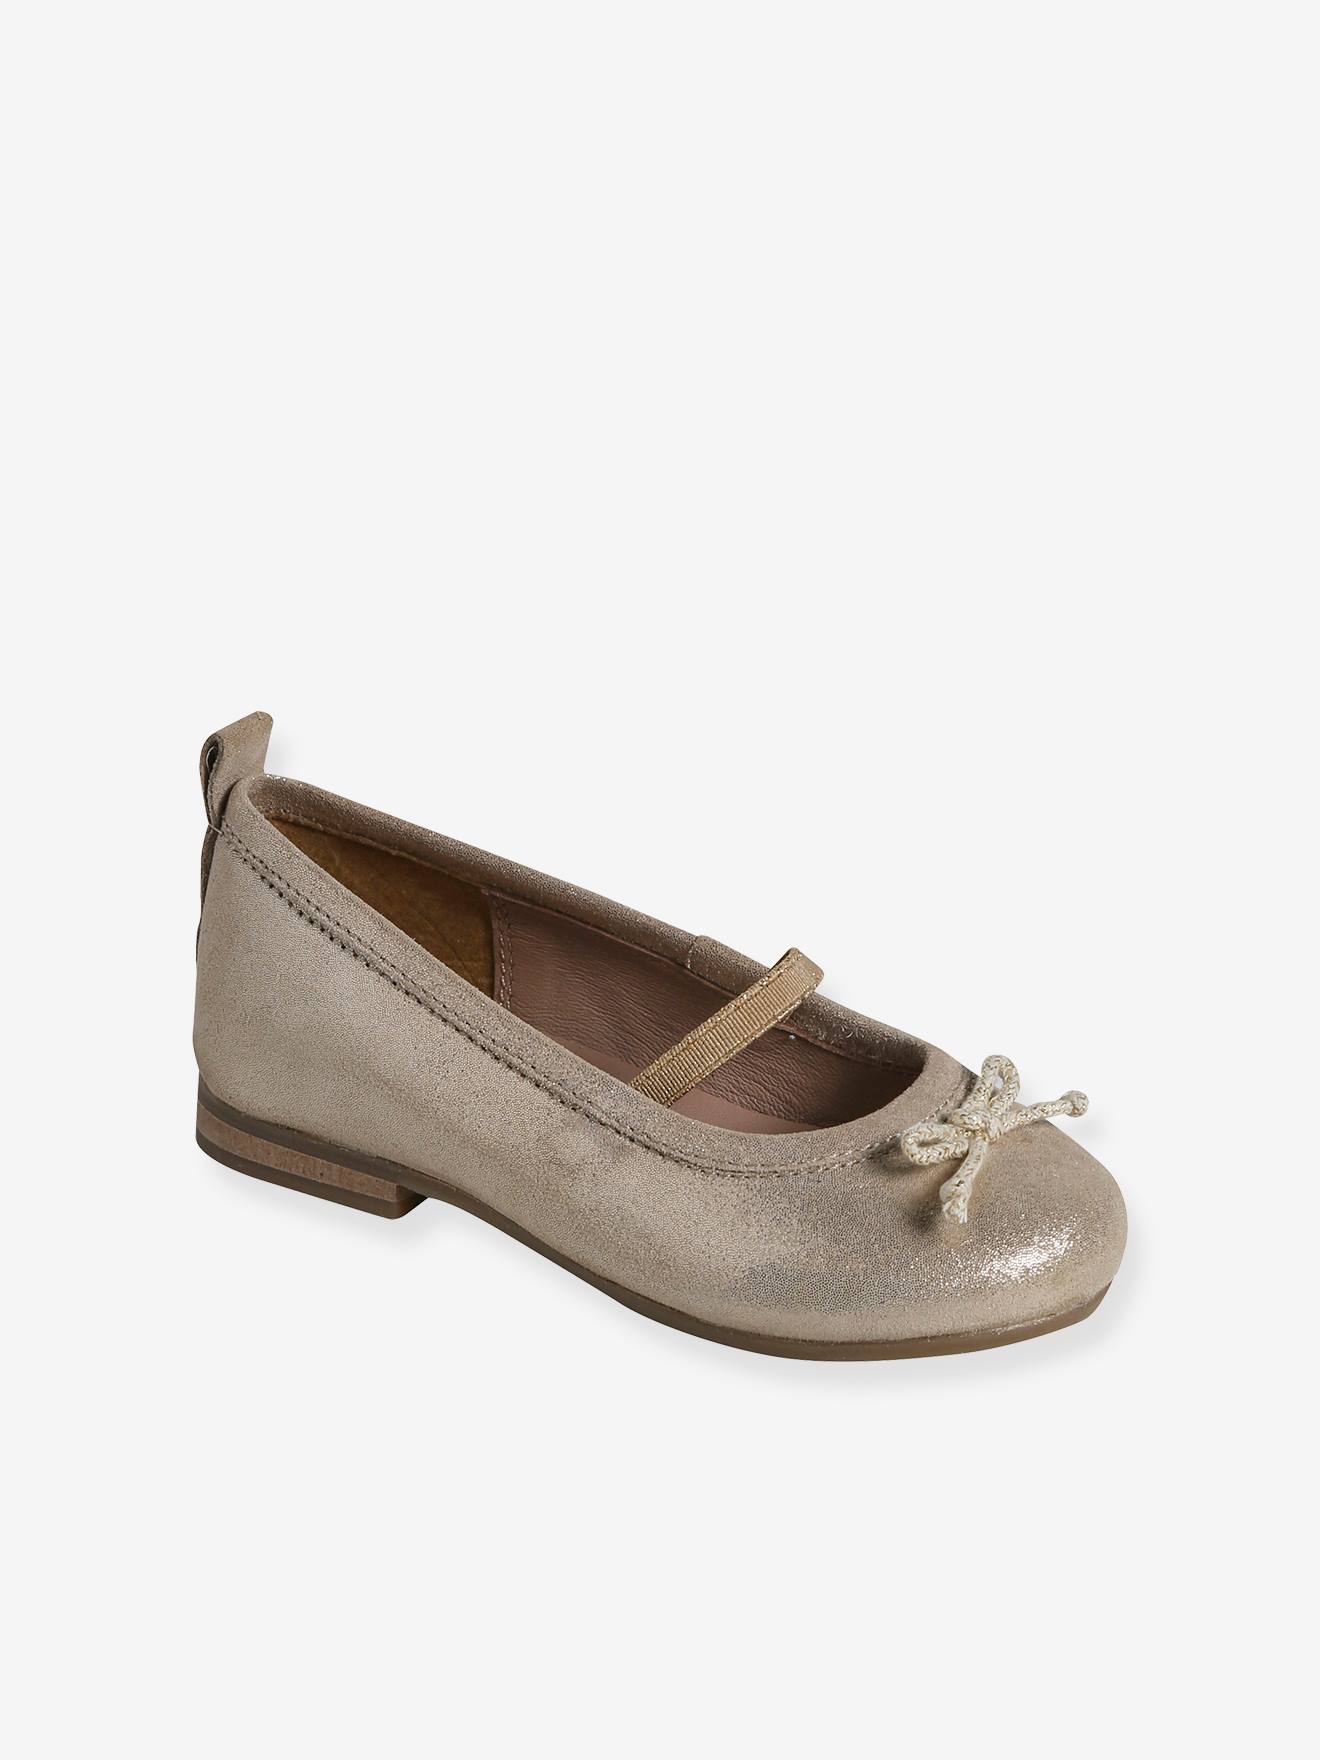 Ballet Pumps in Metallised Leather for Girls gold